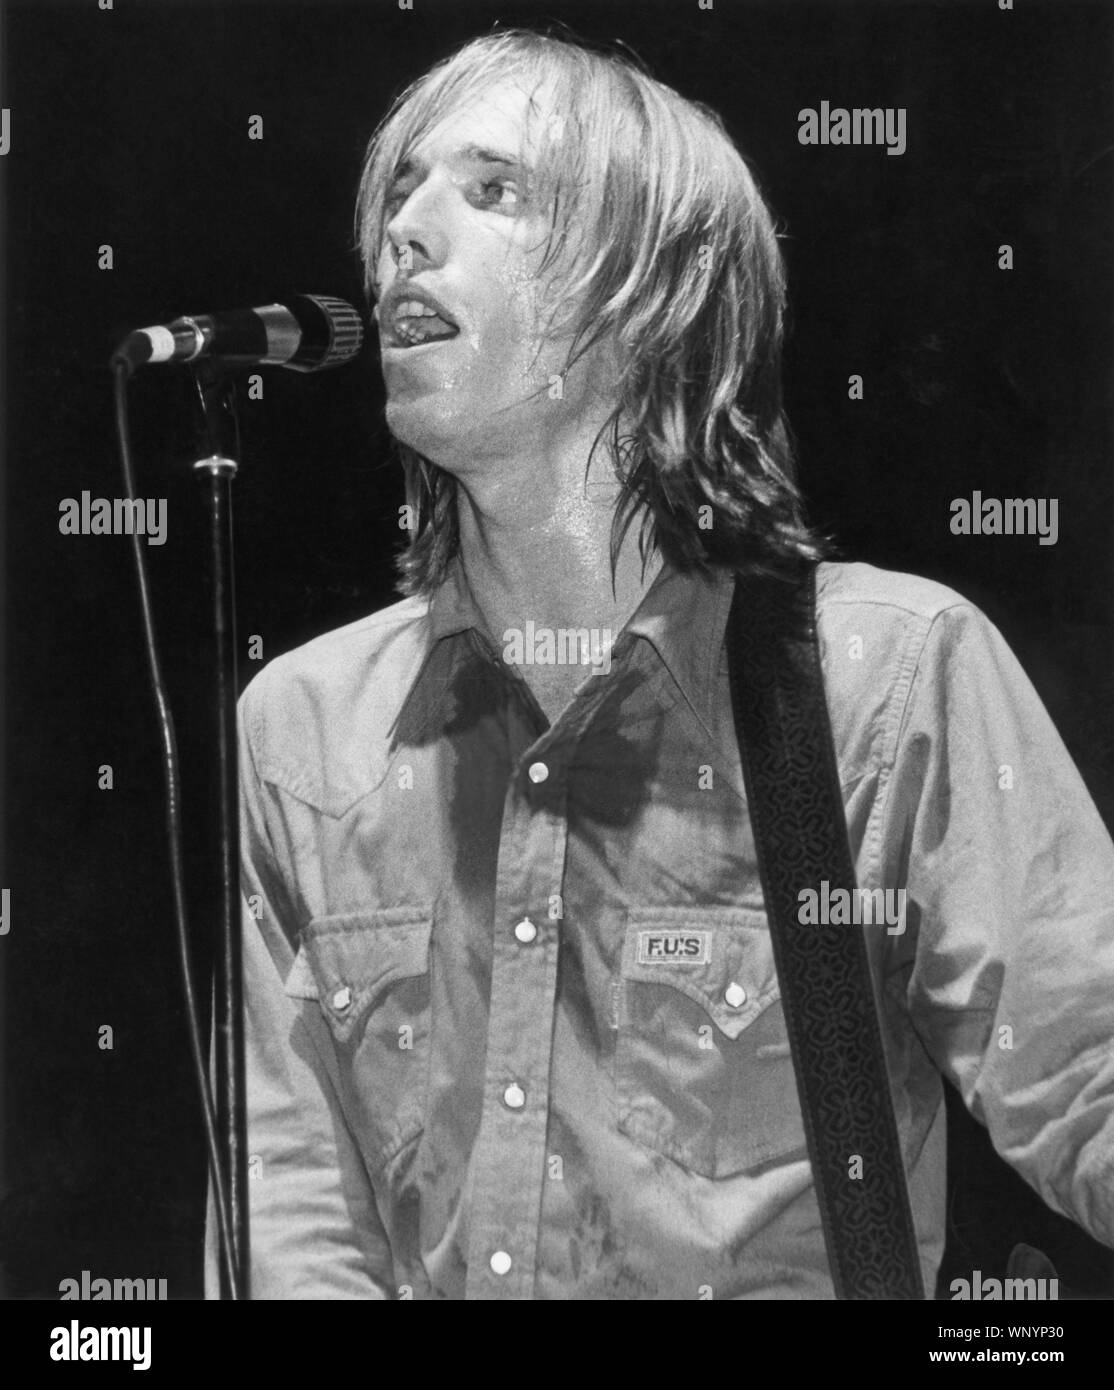 Tom Petty onstage at the Palladium, NYC in July 1978 Stock Photo